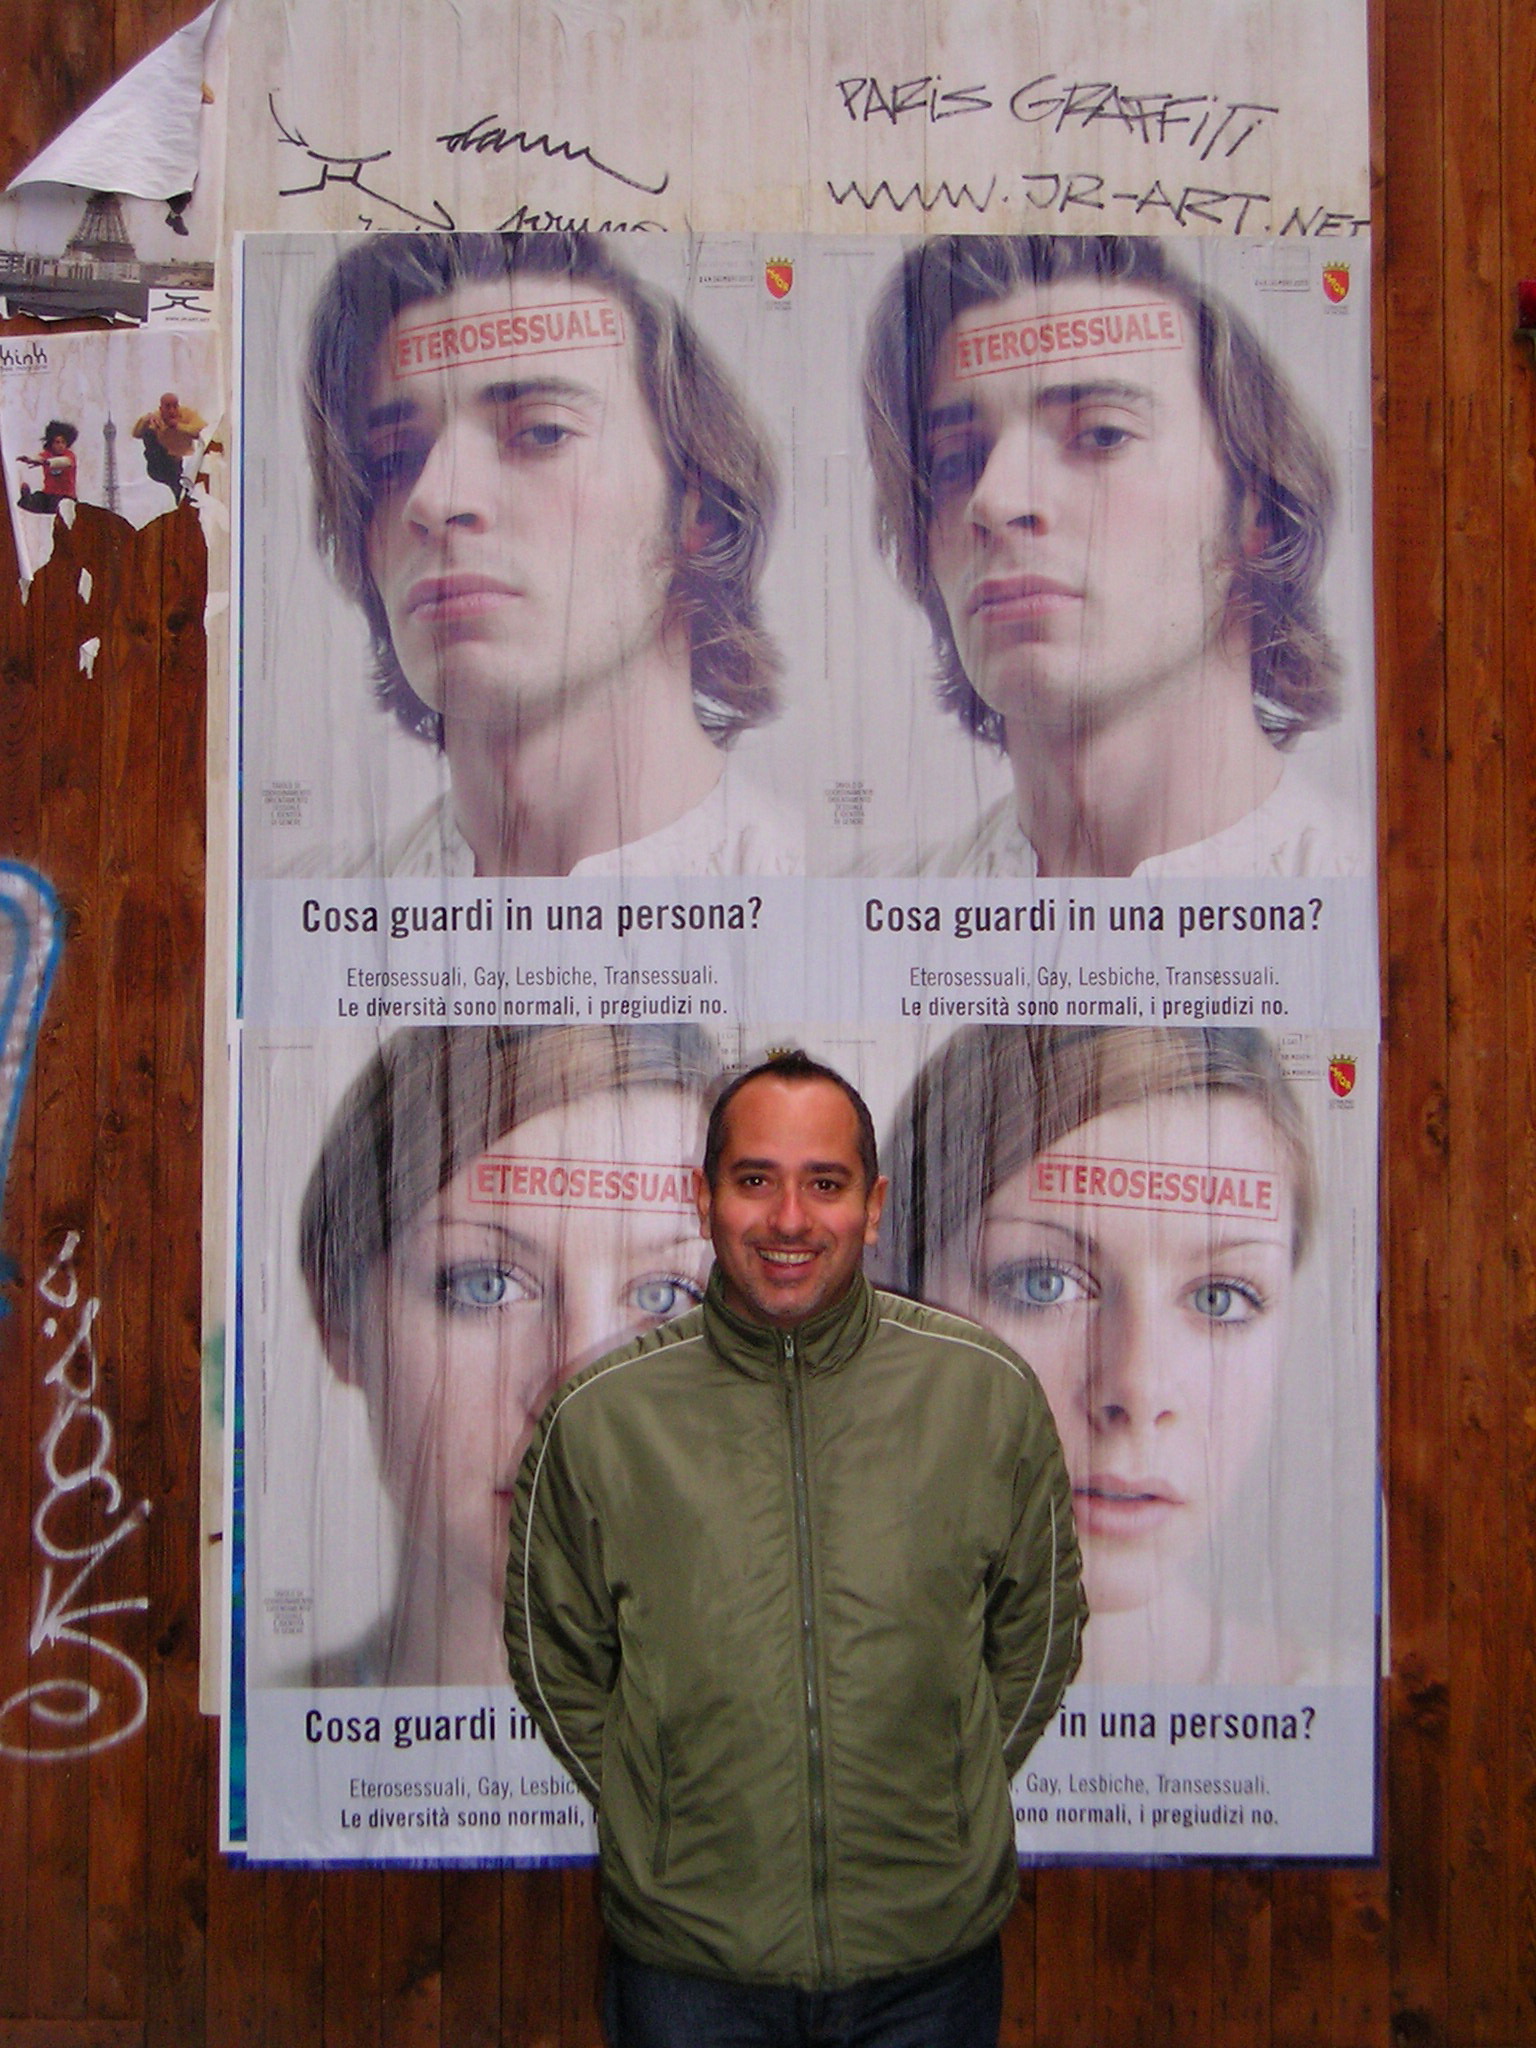 Franco Di Chiera in Rome in front of a poster for the gay anti-discrimination campaign: What do you see in a person? Watch his films and find out. Experience the full range of human emotion - the drama of life. Diversity is the key.